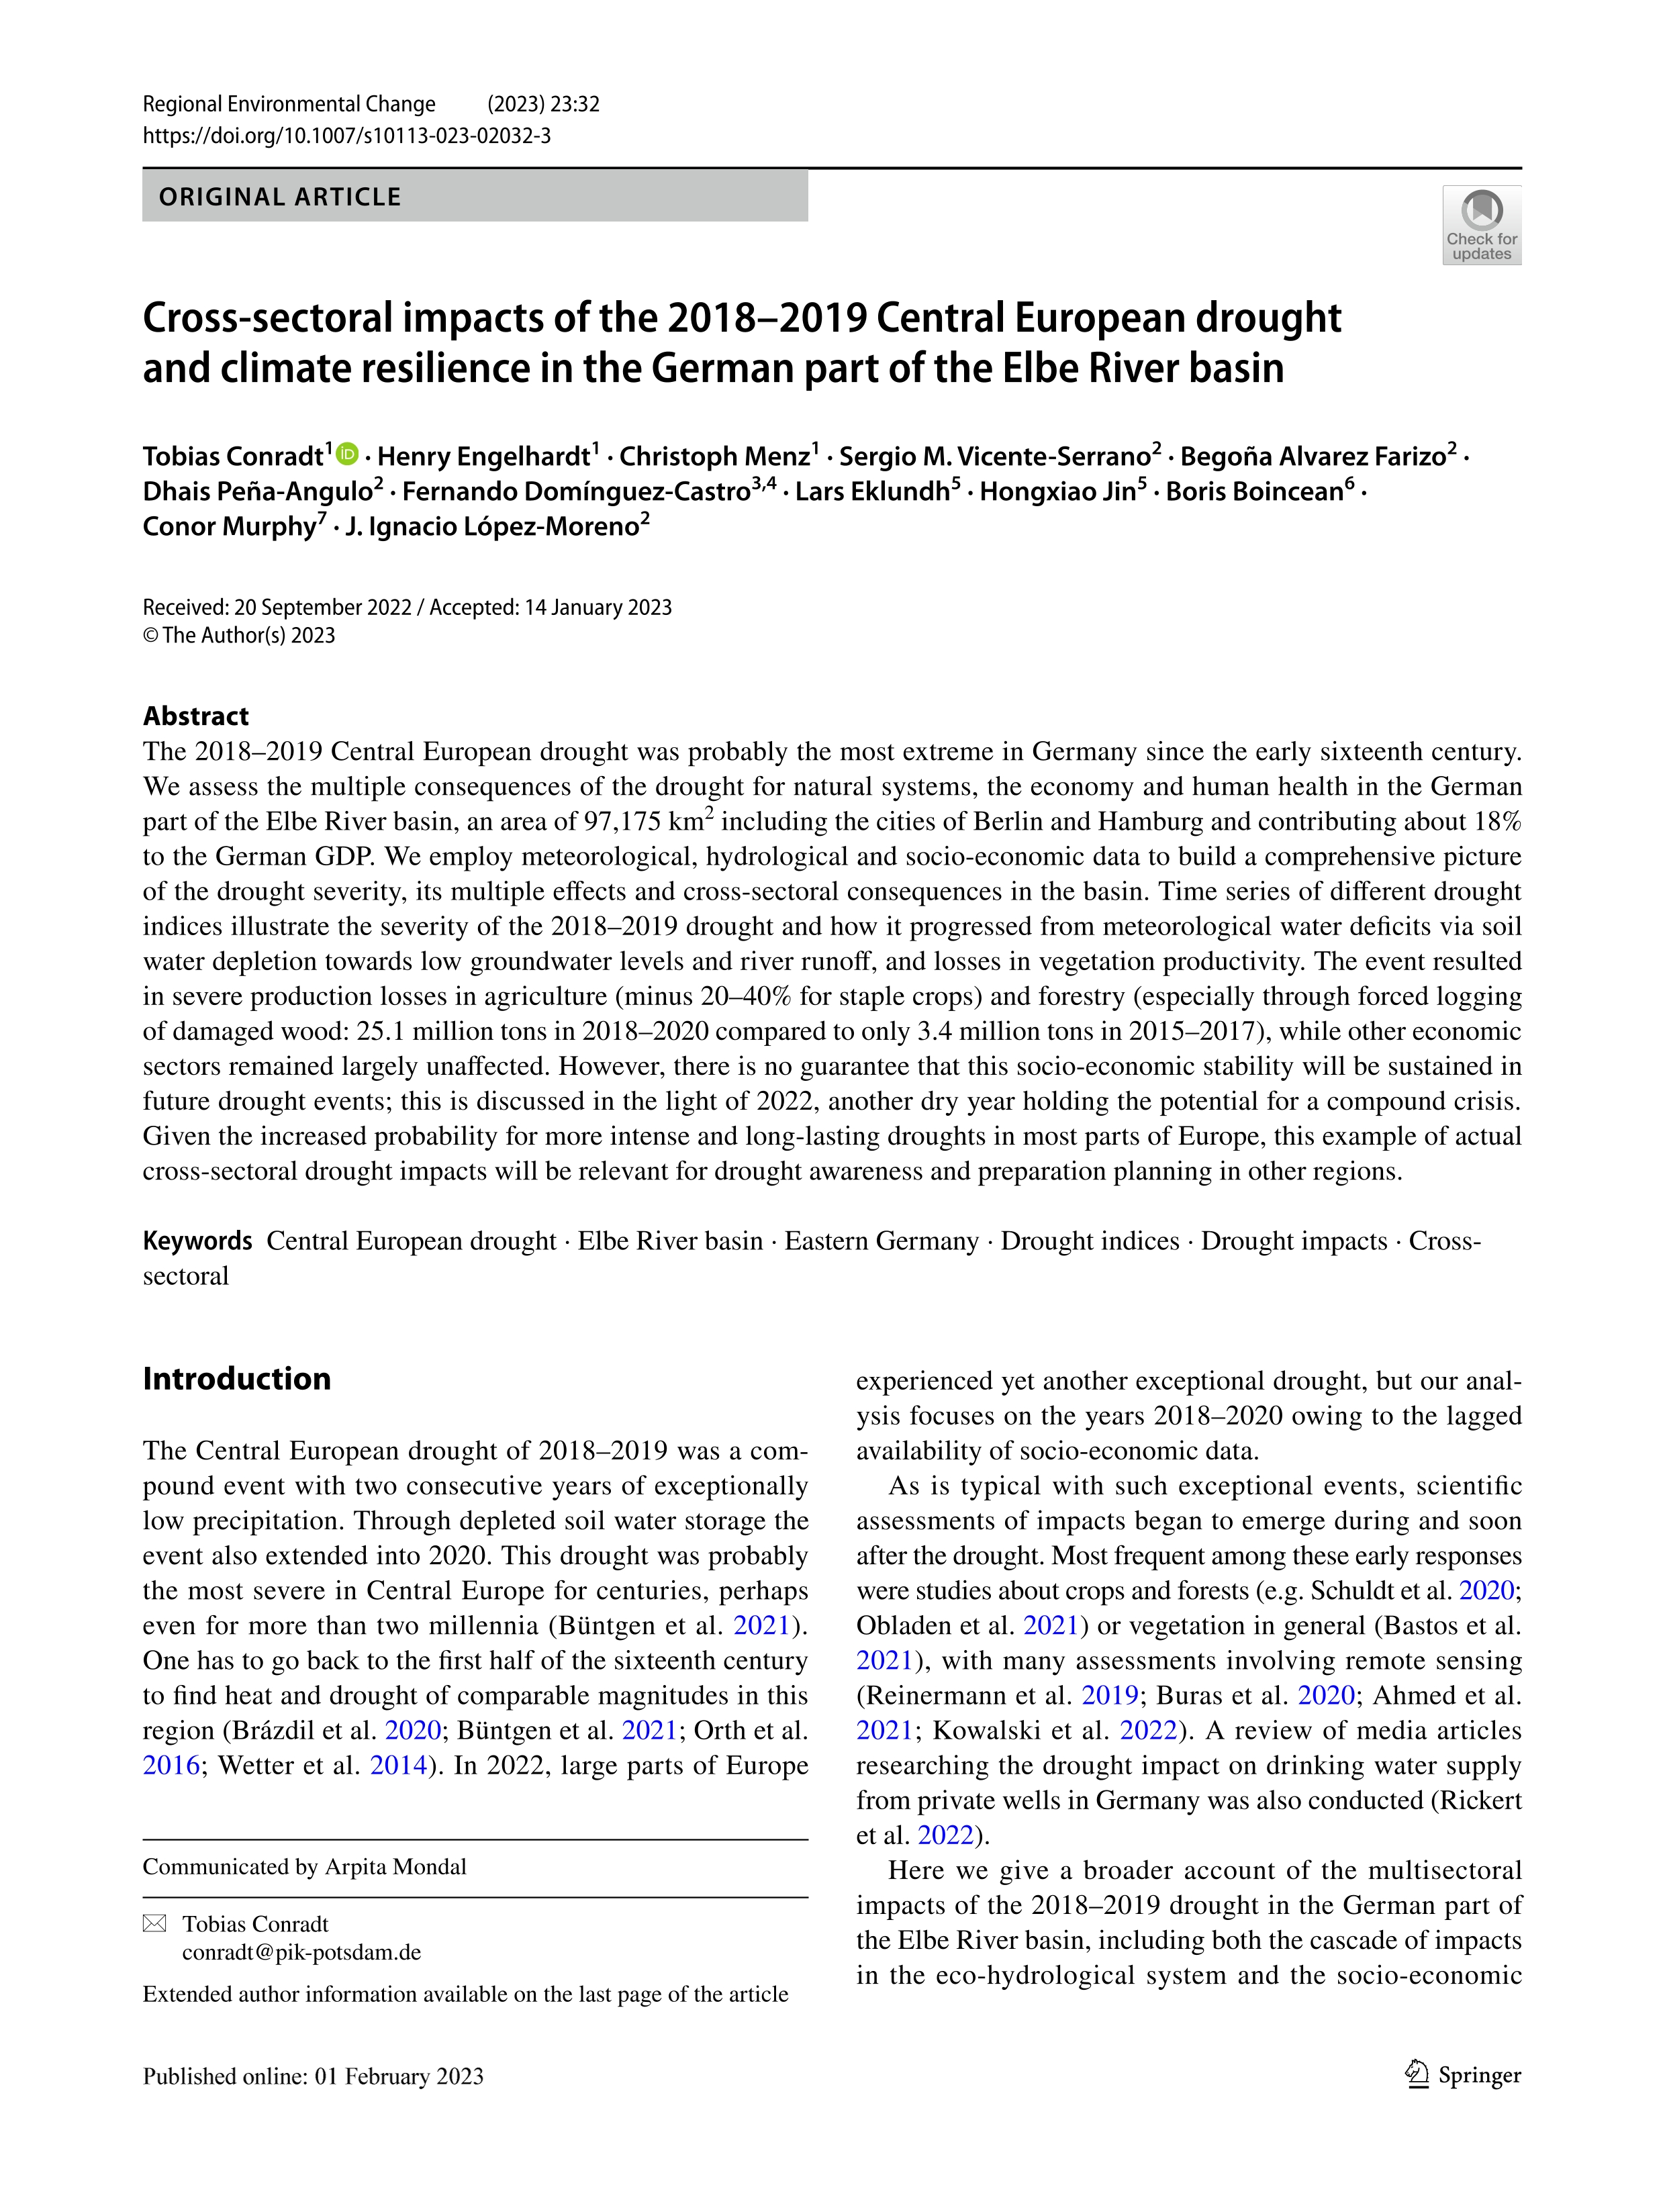 Cross-sectoral impacts of the 2018–2019 Central European drought and climate resilience in the German part of the Elbe River basin